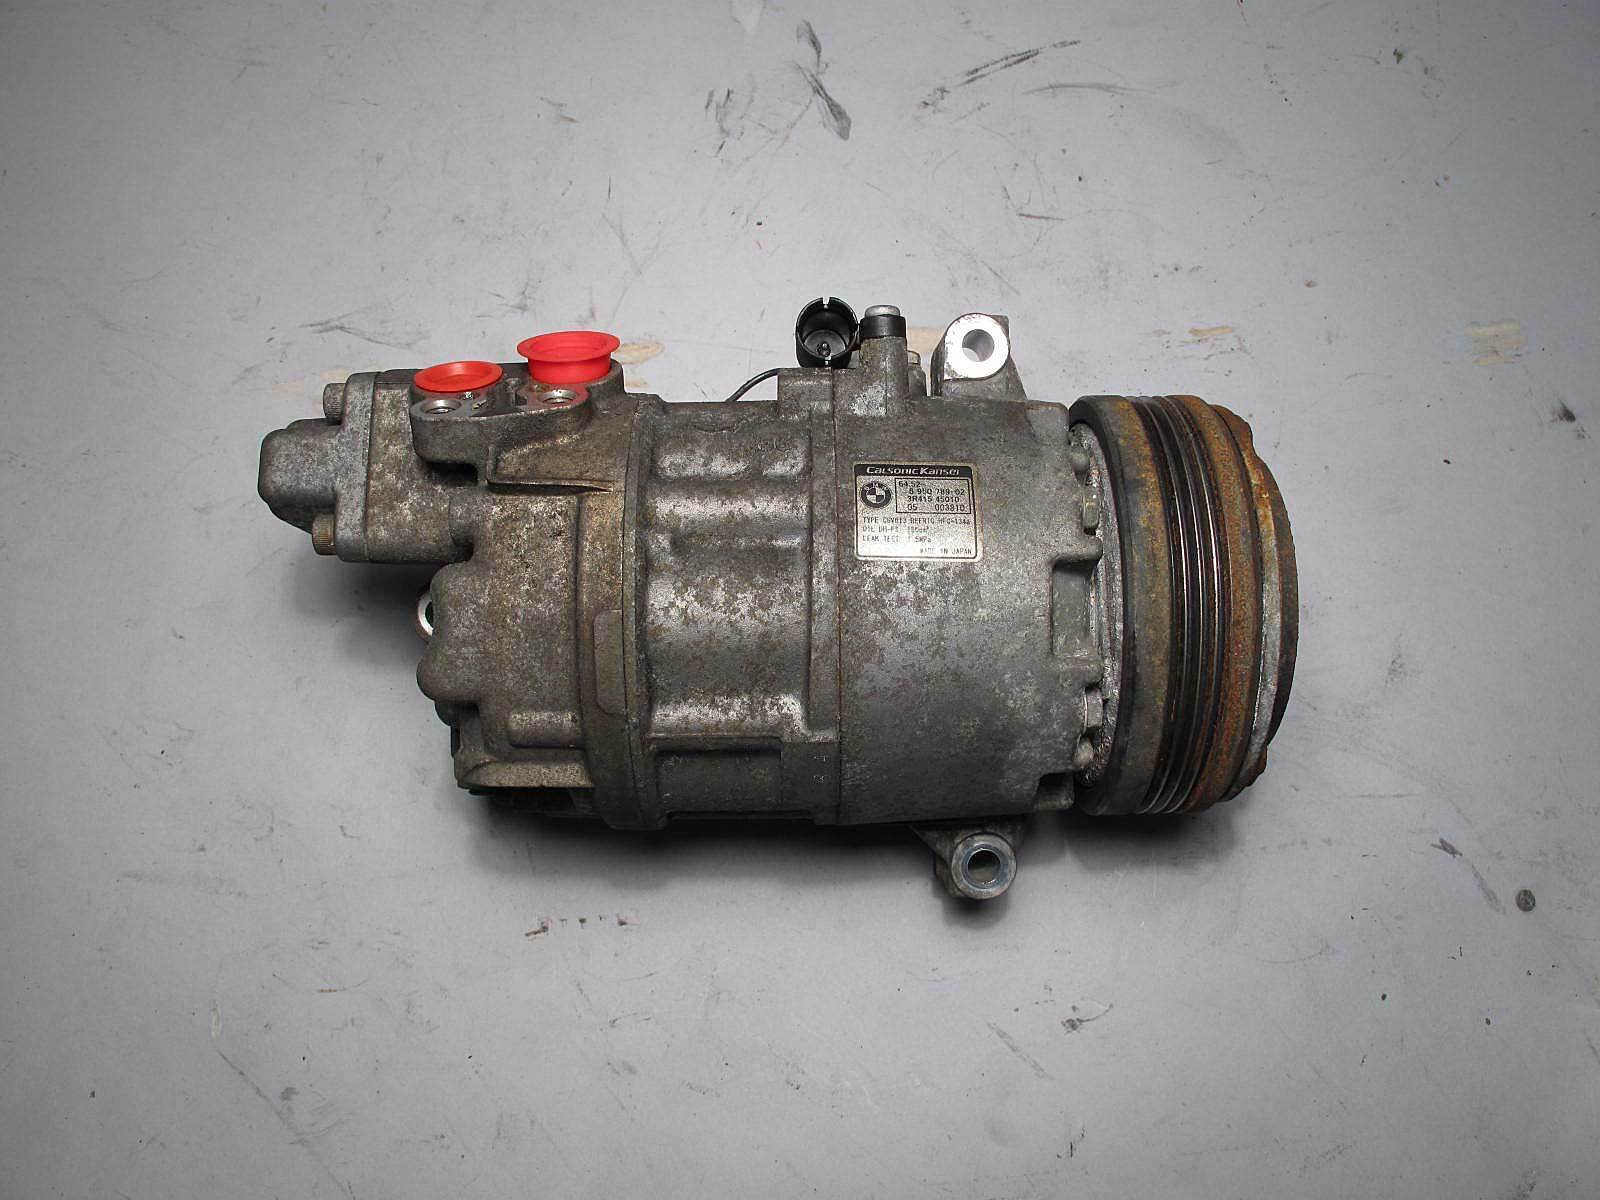 BMW Z4 Roadster AC Air Conditioning Compressor Pump 2003-2005 E85 USED OEM